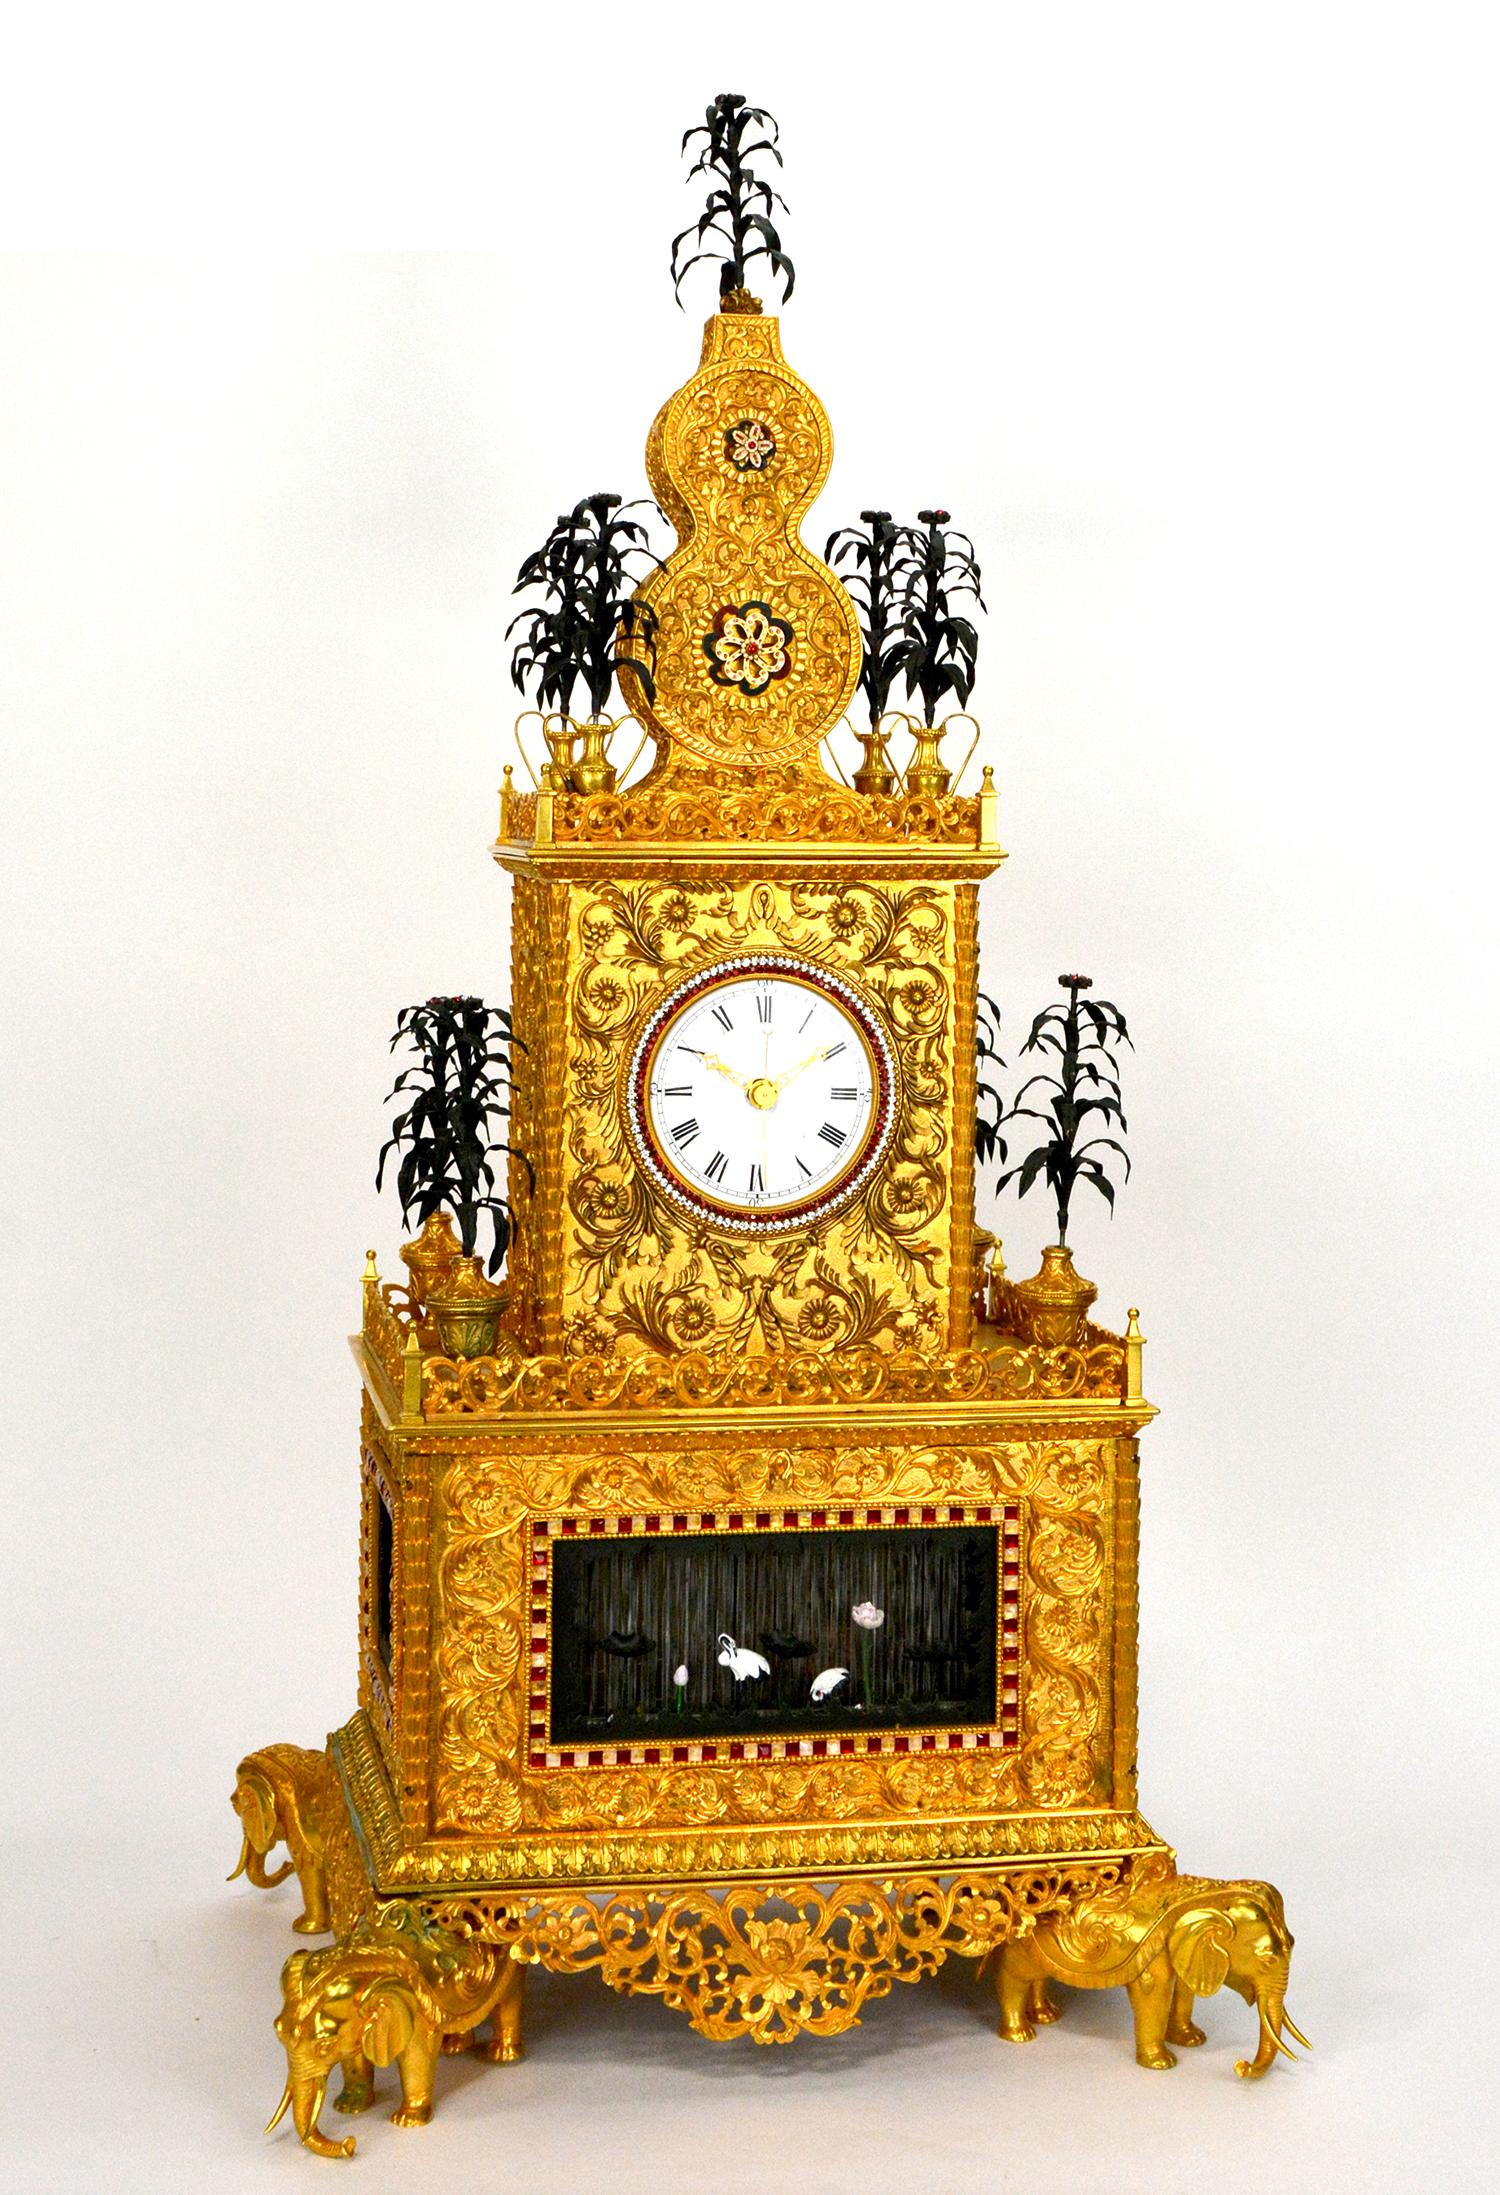 Massive Chinese Ormolu High Relief Bronze Elephant Automaton Music Bracket Clock

A truly magnificent Chinese Guangzhou studio automaton clock , large triple deck body supported on the back of four elephants , extremely ornate bronze case, floral